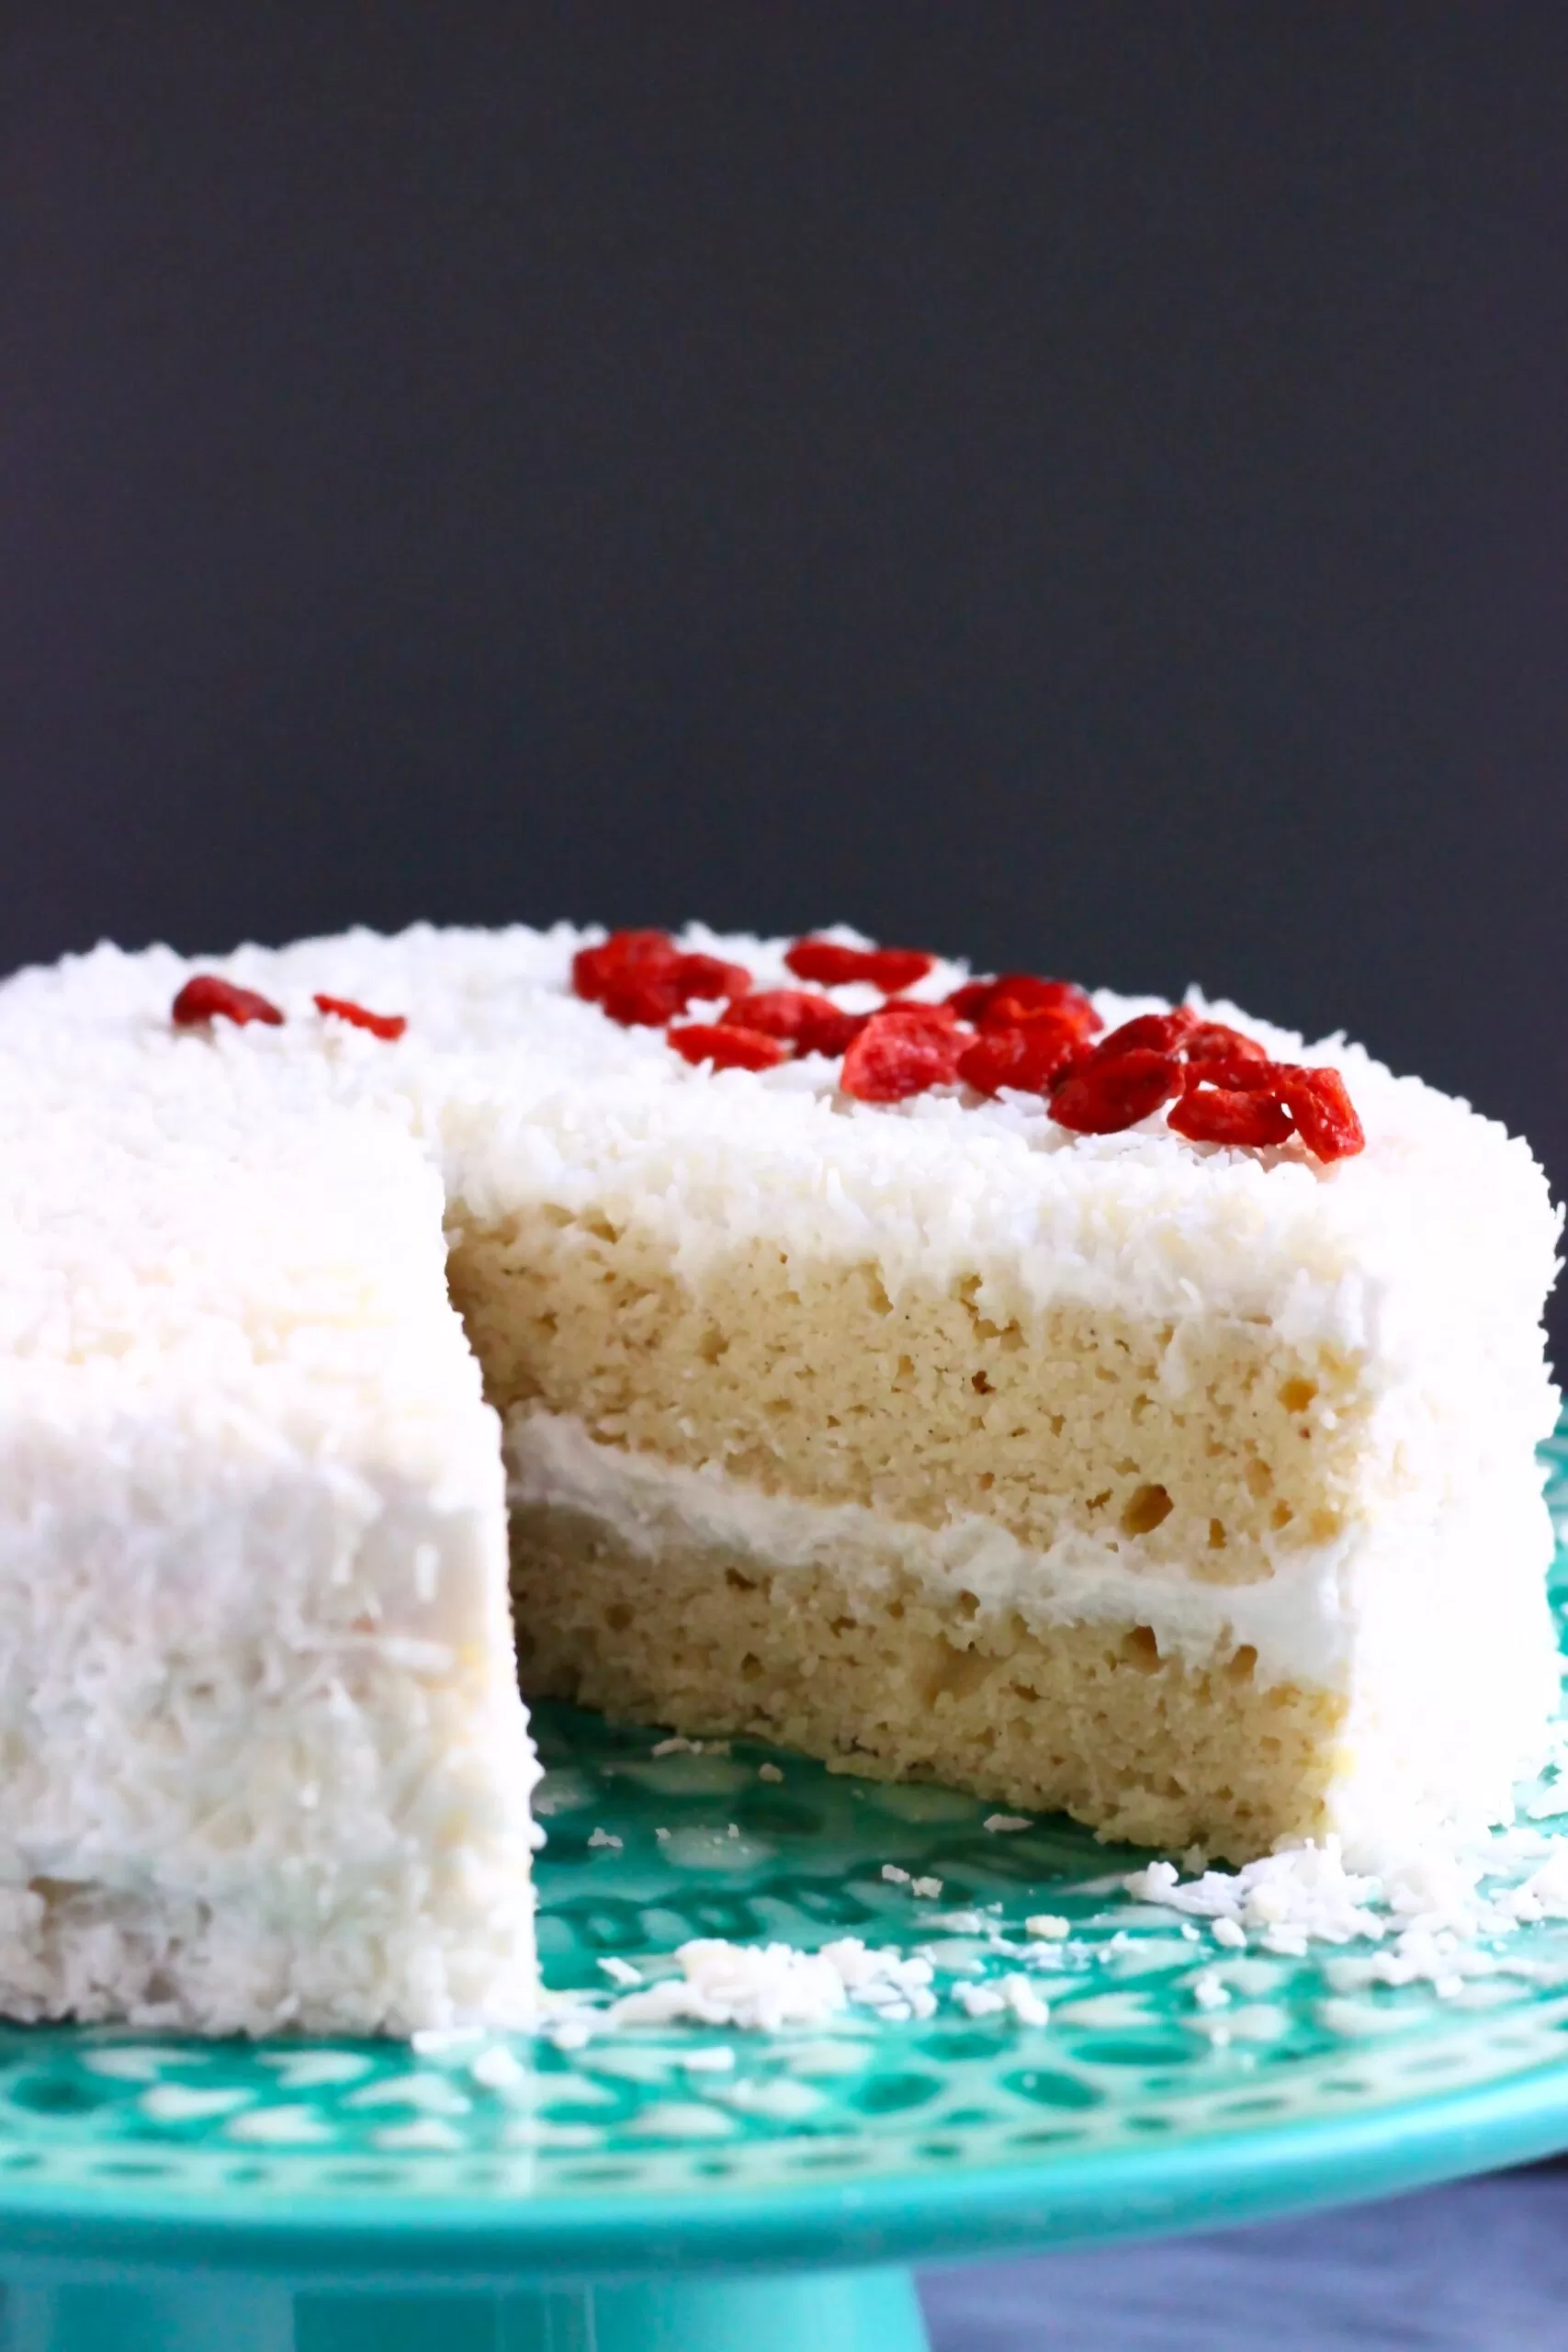 A white sponge cake covered in creamy frosting and coconut sprinkled with red goji berries against a dark grey background